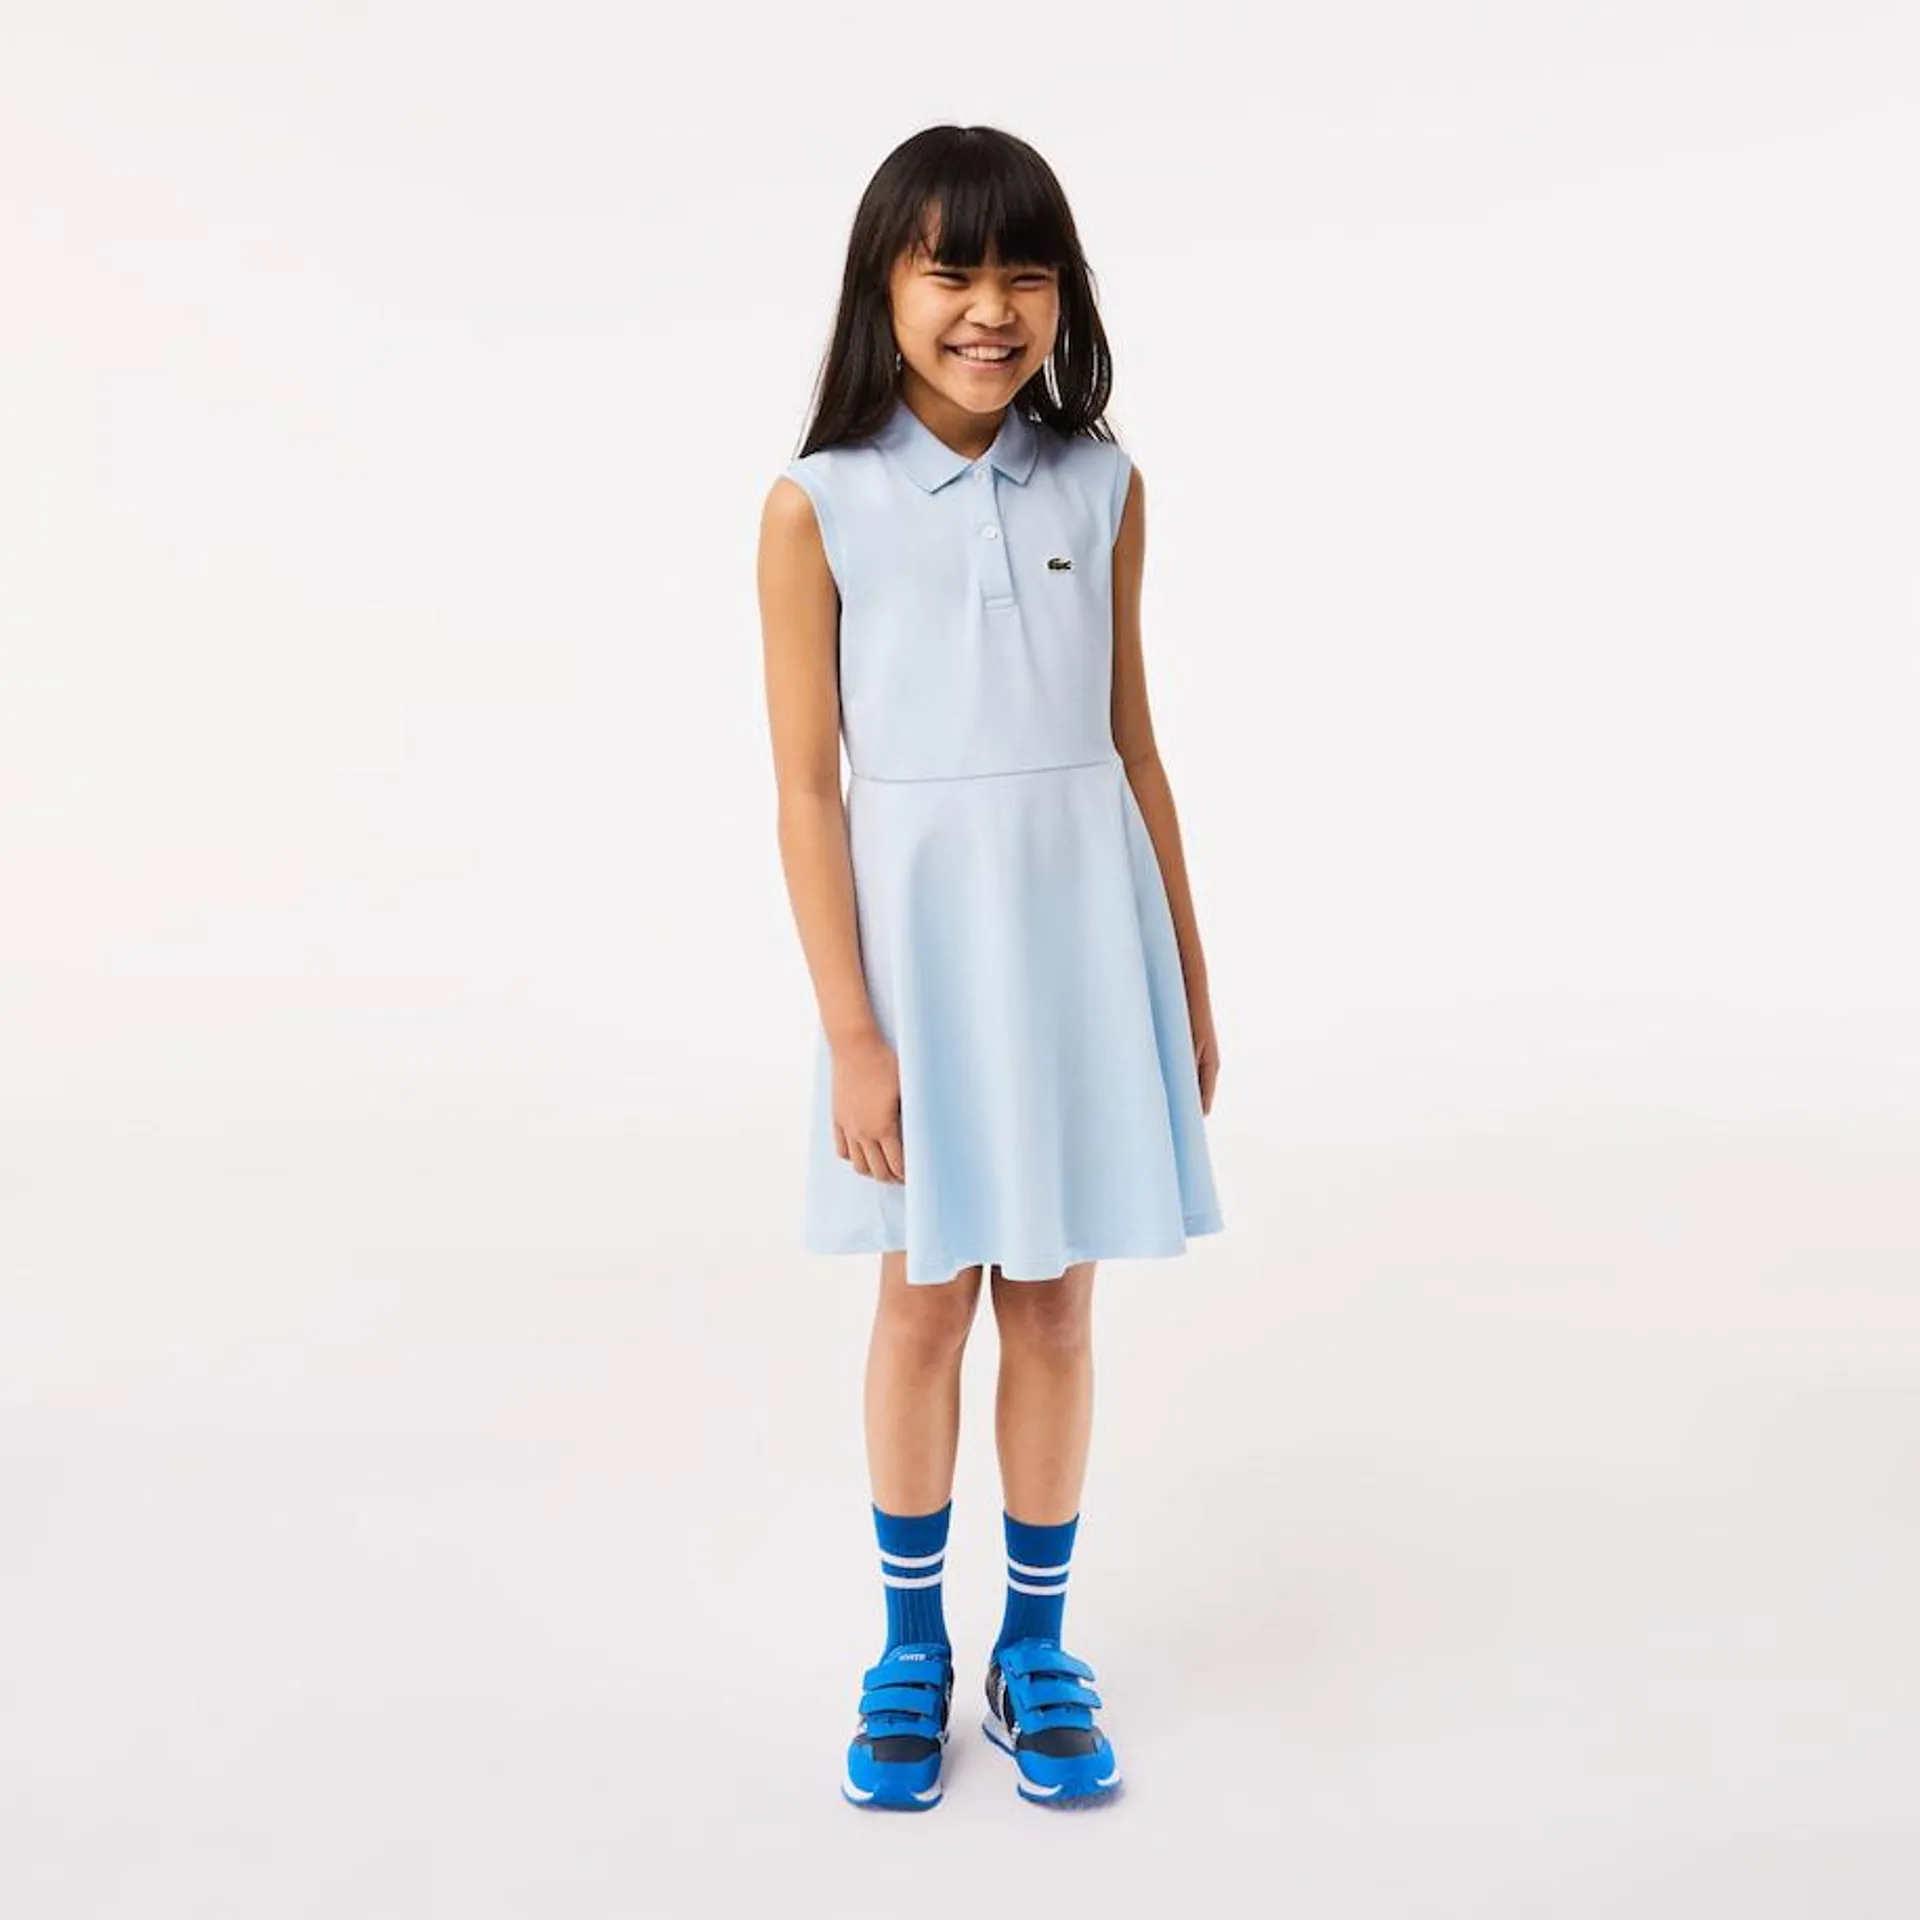 Girls’ Lacoste Fit and Flare Stretch Piqué Polo Dress